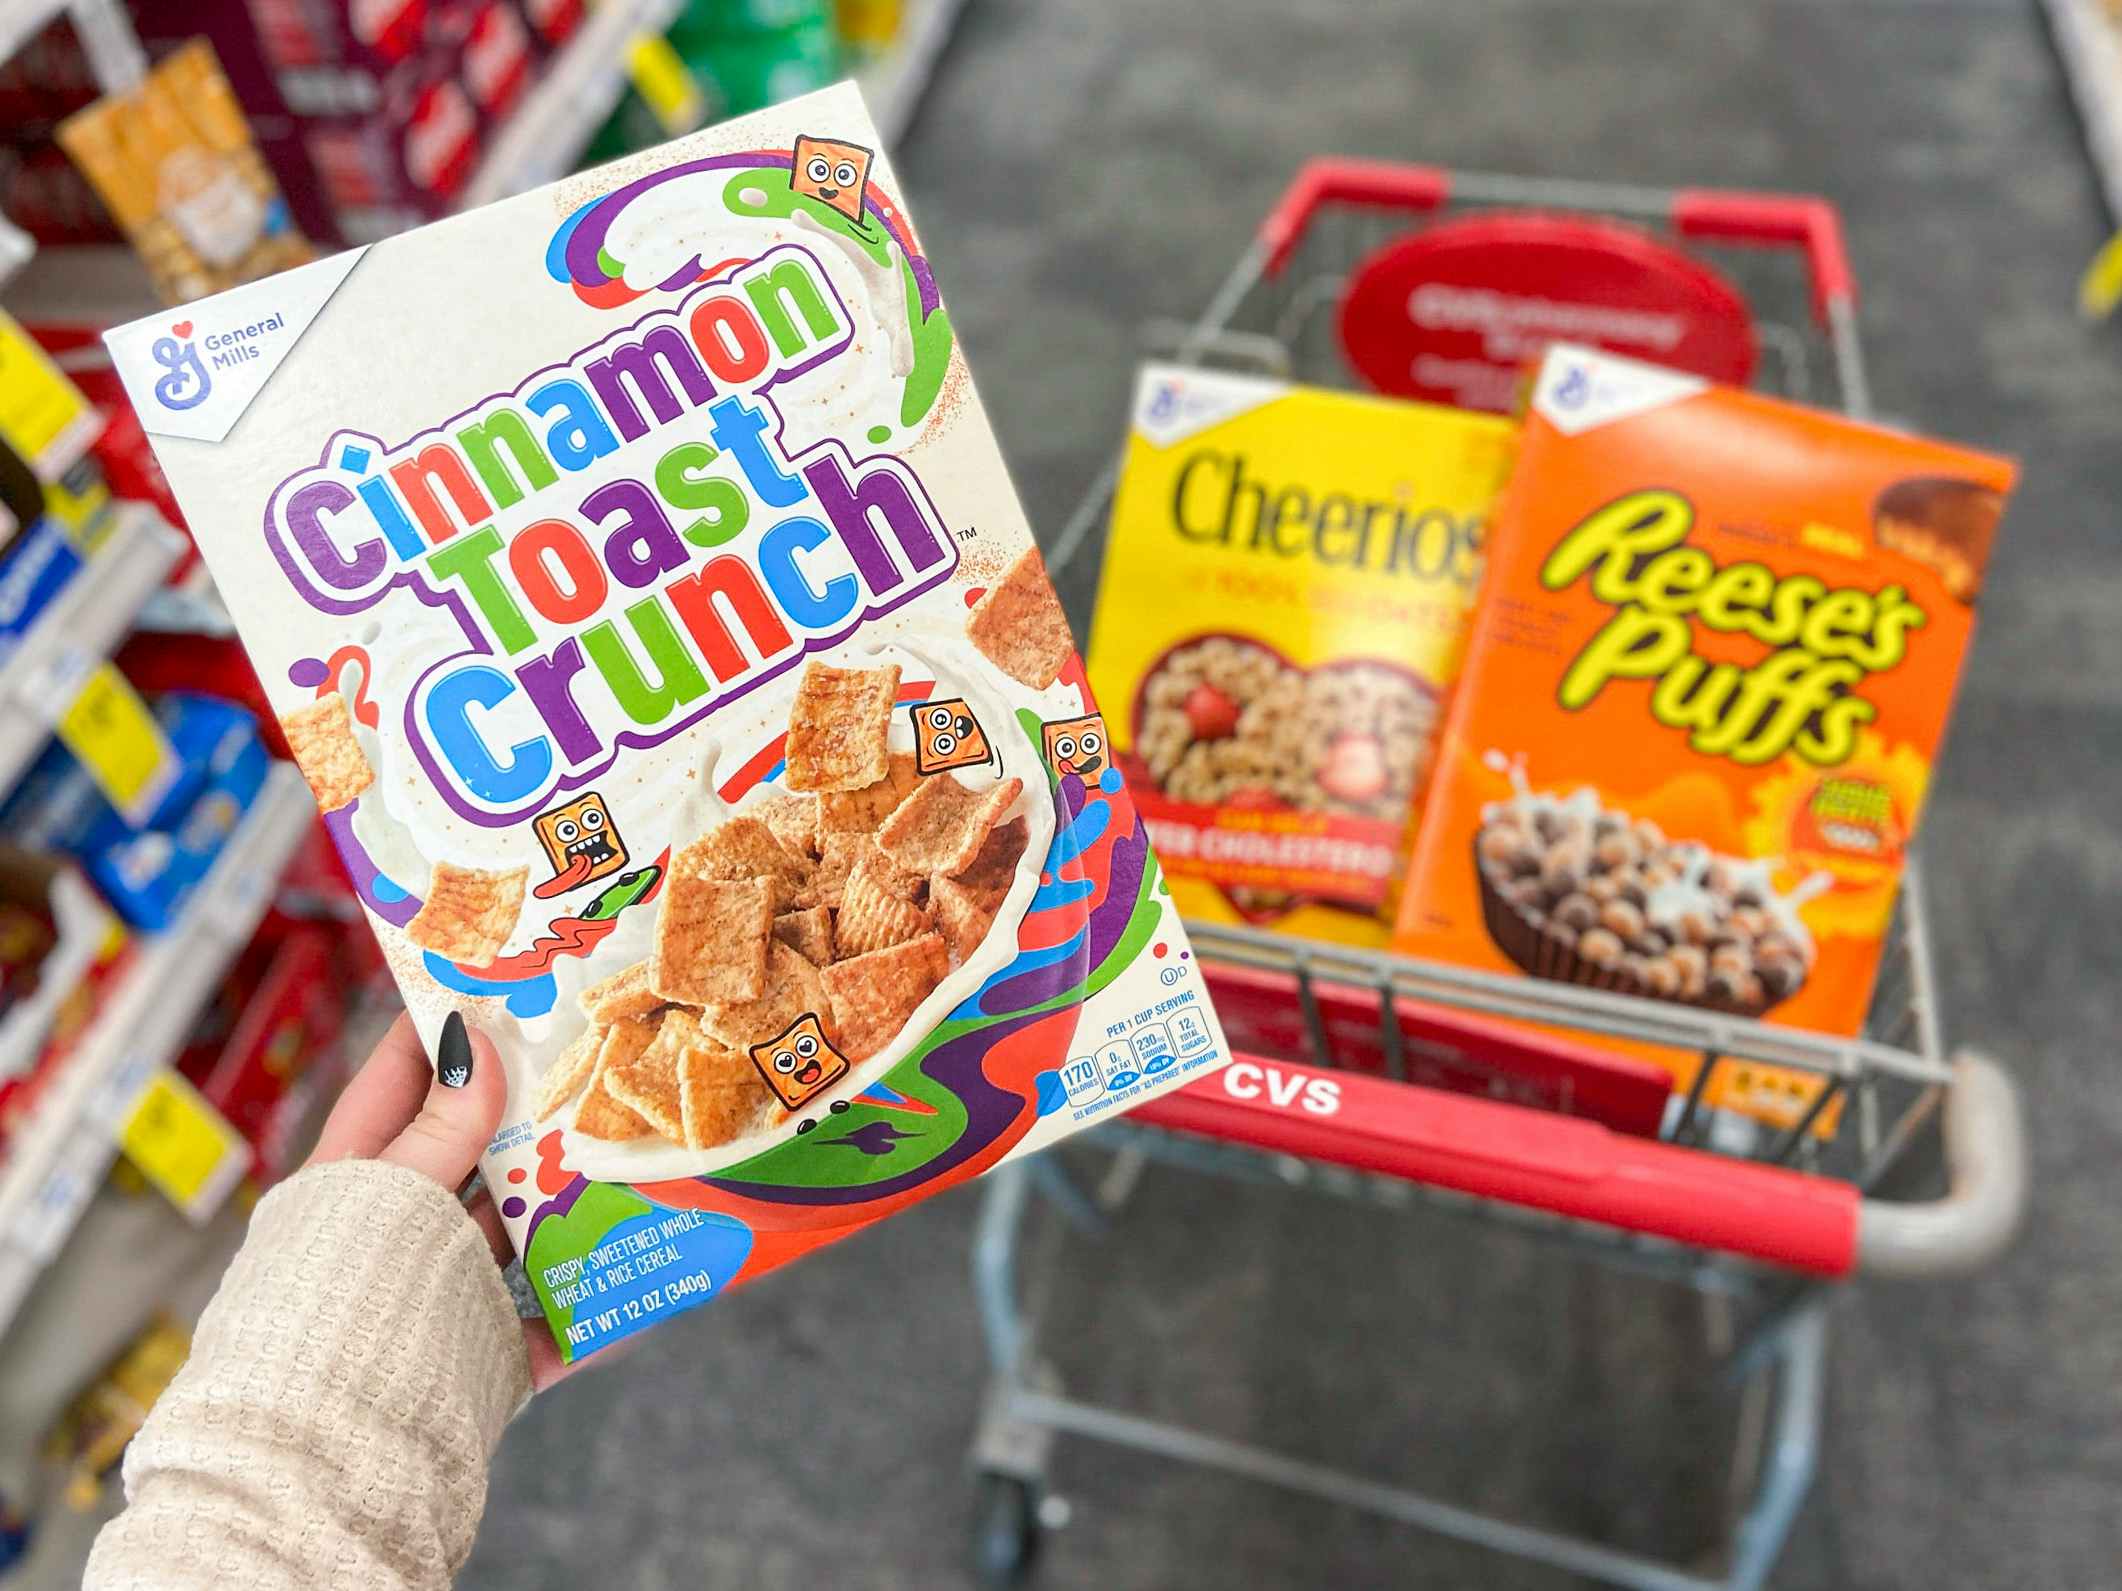 A person's hand holding a box of Cinnamon Toast Crunch in front of a box of Cheerios and a box of Reese's Puffs that are sitting in a CVS shopping cart parked in the aisle at CVS.